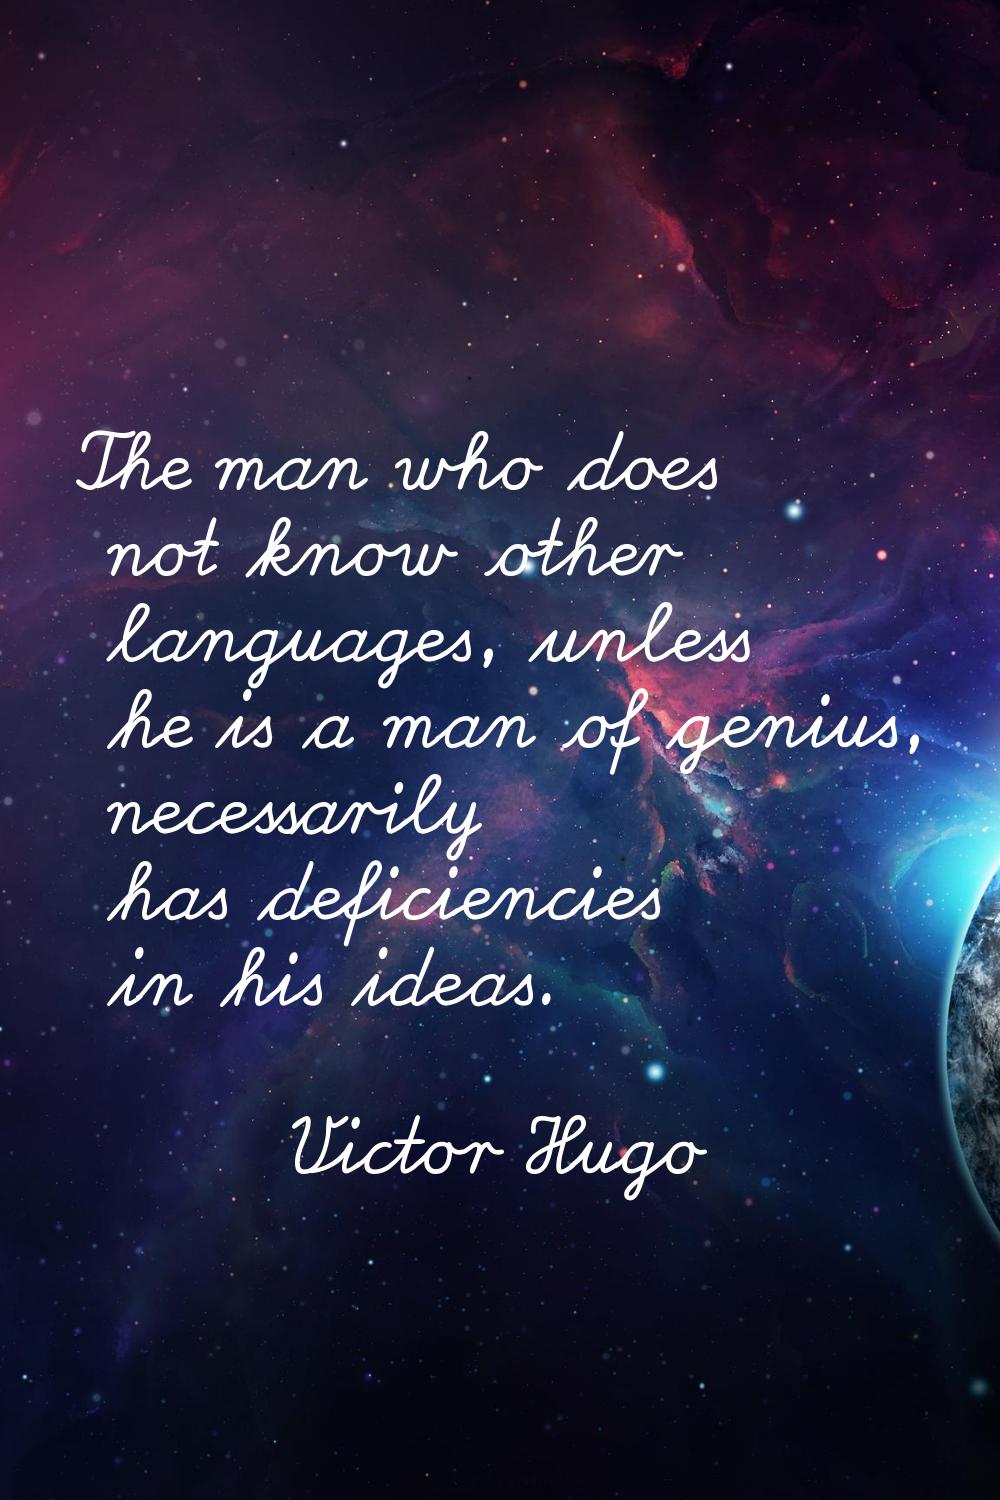 The man who does not know other languages, unless he is a man of genius, necessarily has deficienci